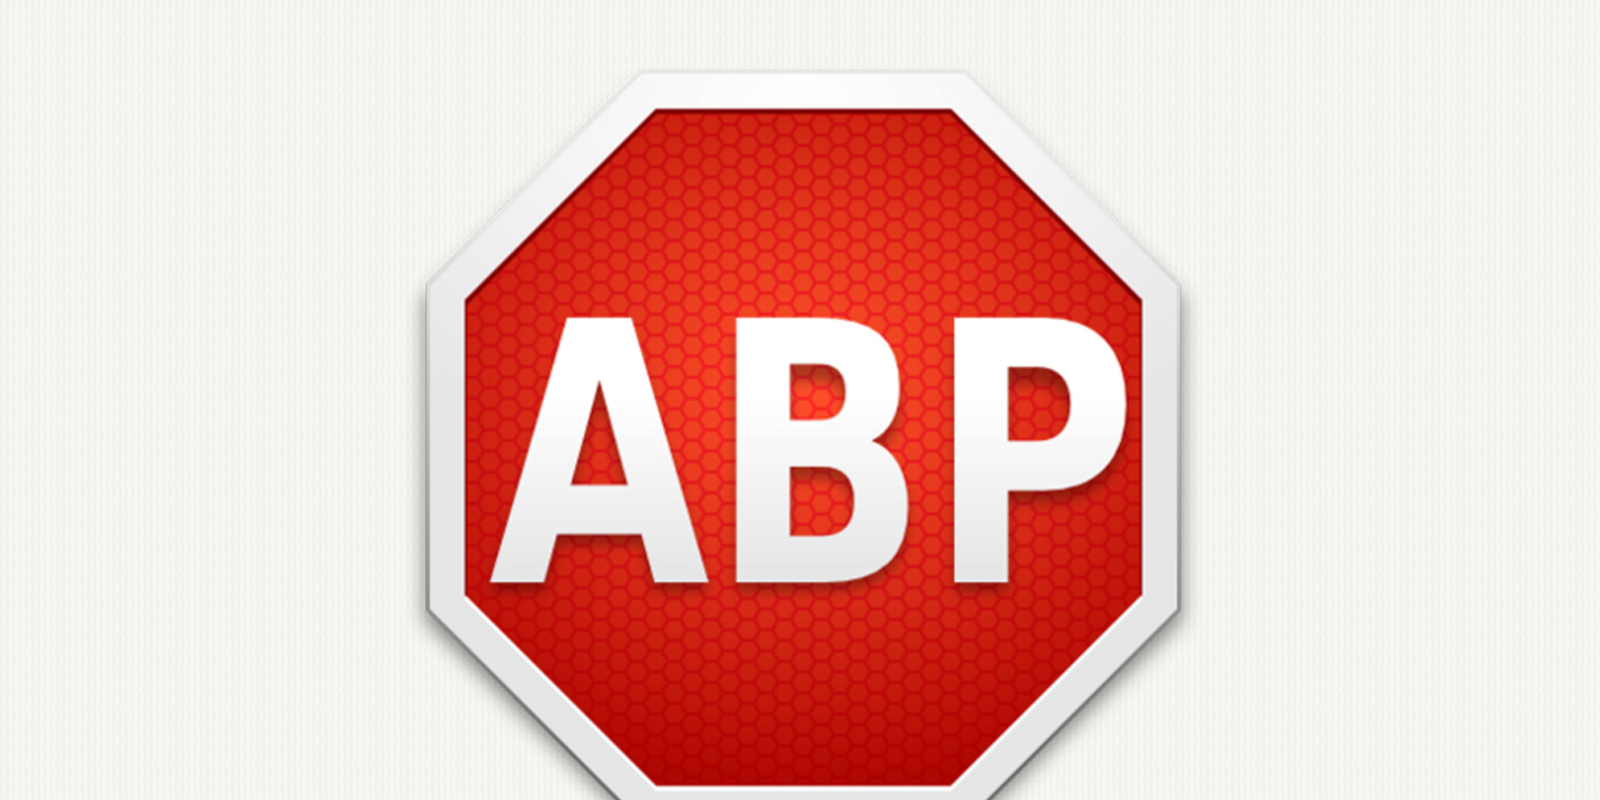 Eyeo's Adblock Plus: Consumer Movement or Advertising Toll Booth?